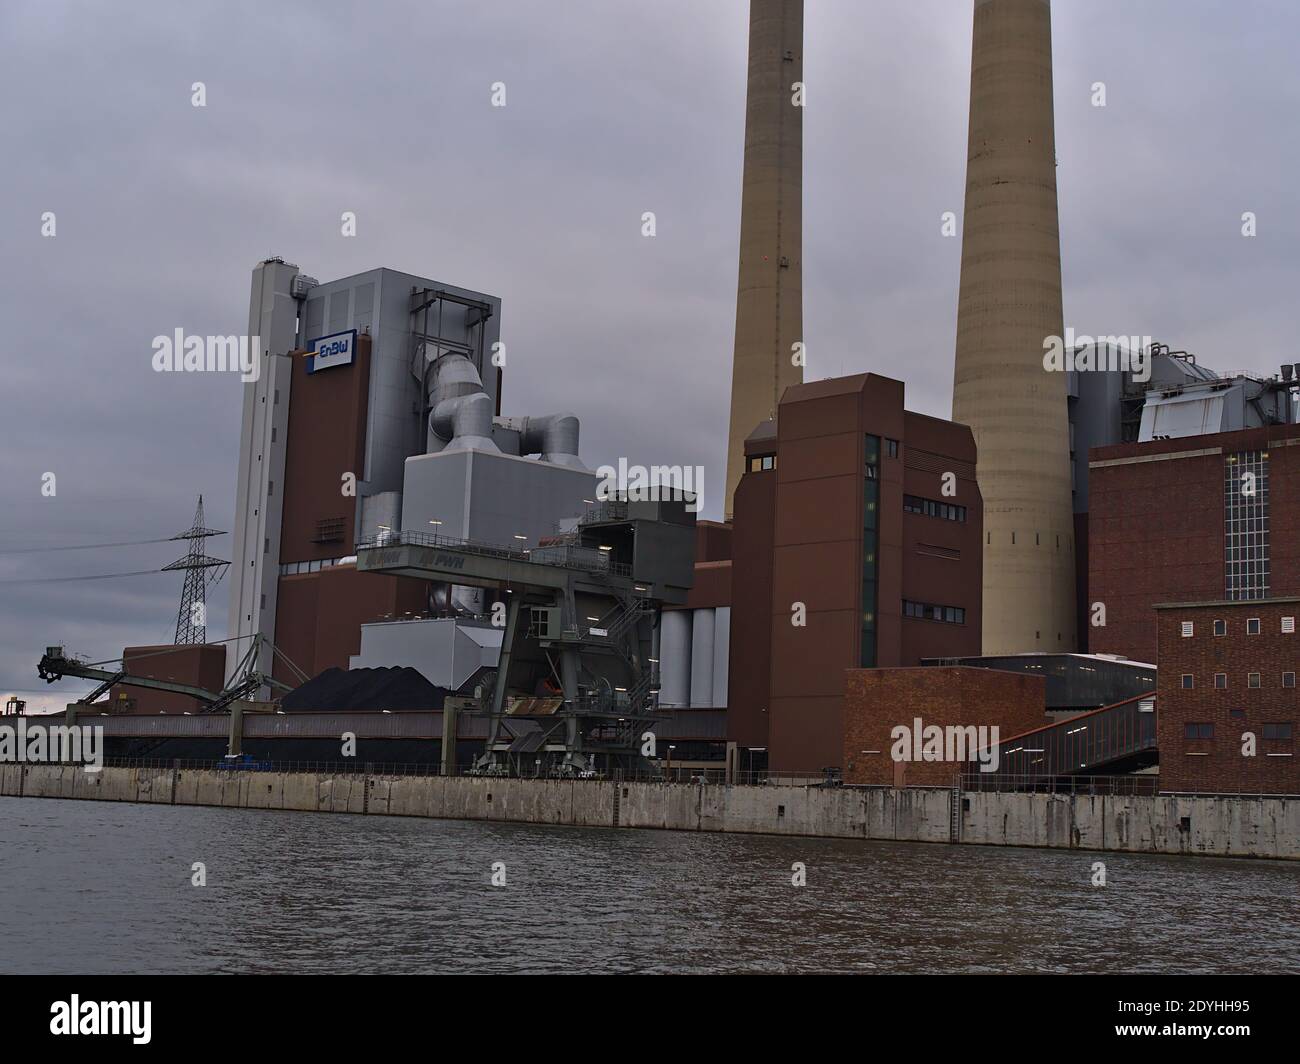 View of coal-fired Heilbronn Power Station operated by Energie Baden-Württemberg (ENBW) with heap of coal and port crane on th shore of Neckar river. Stock Photo